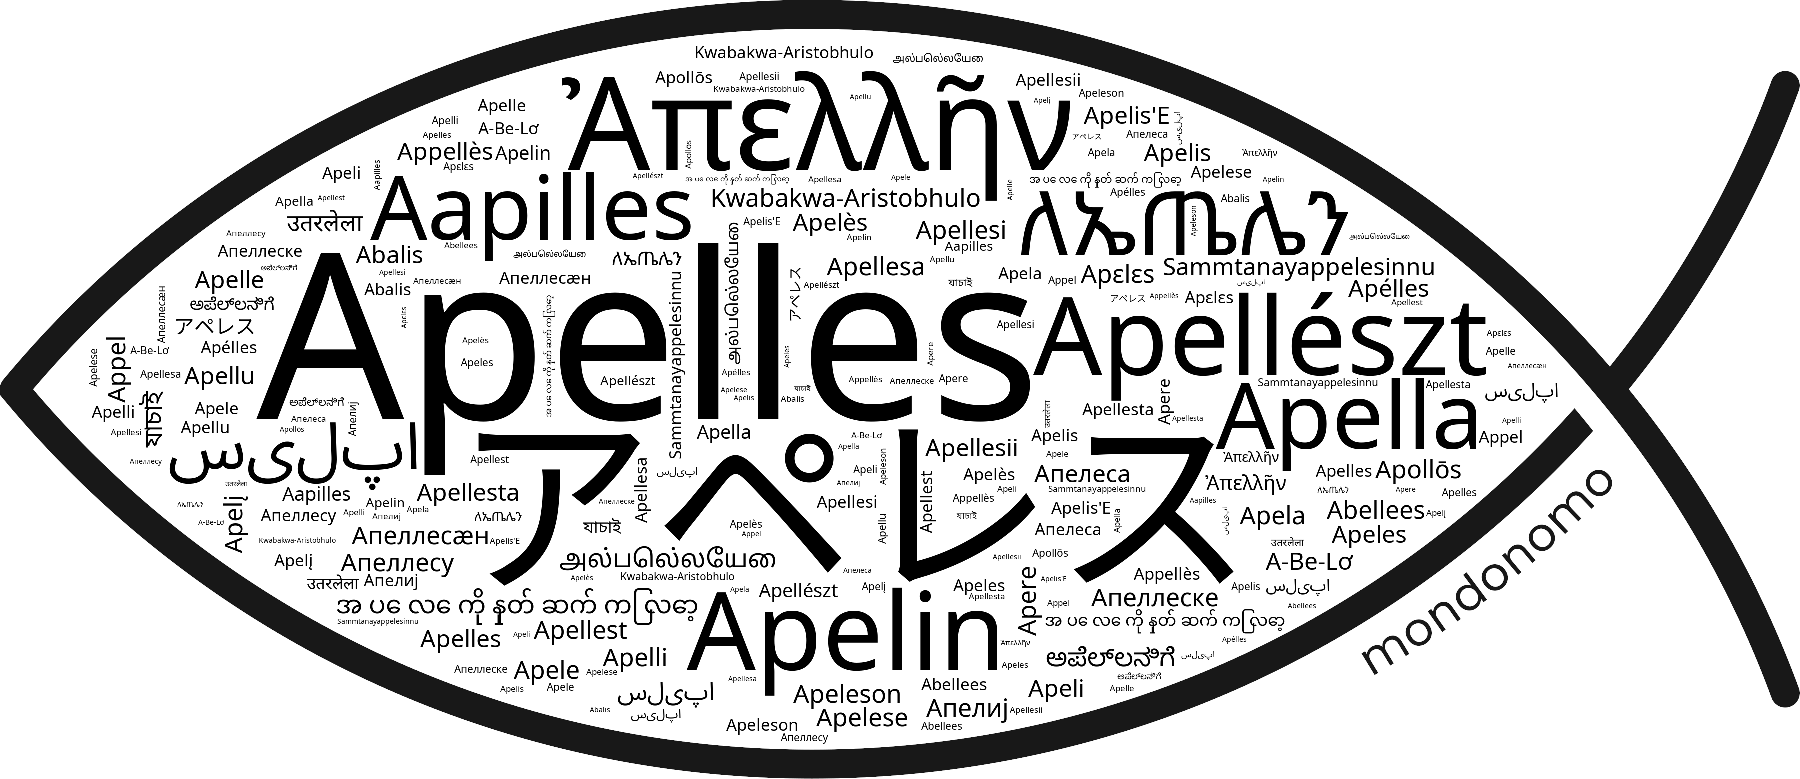 Name Apelles in the world's Bibles